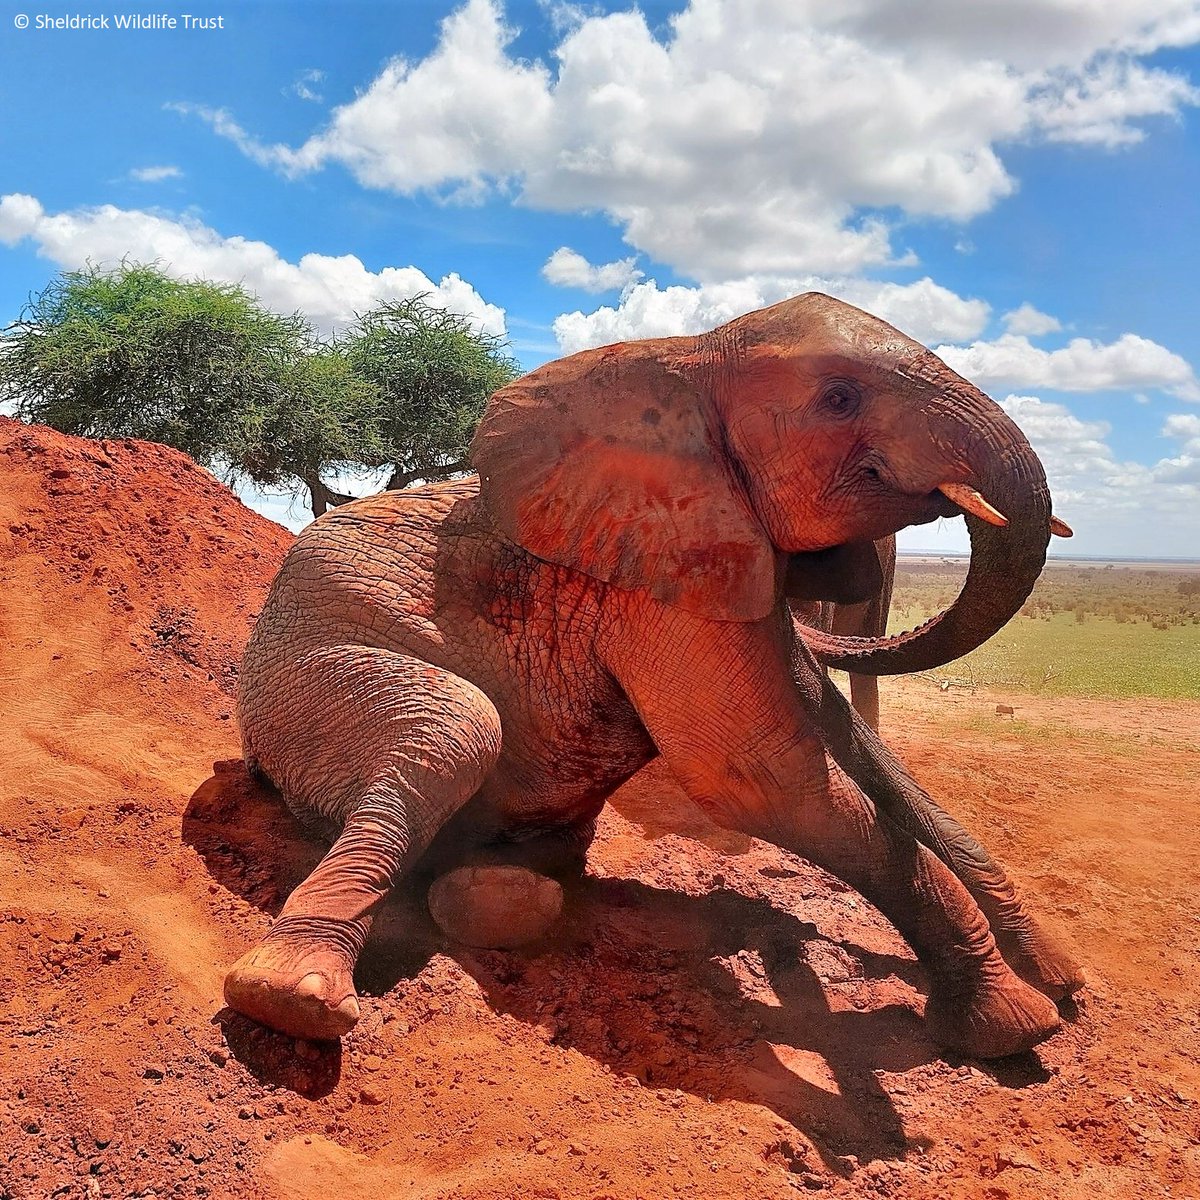 At rescue, the sight of Emoli made our hearts sink. Collapsed, emaciated & barely able to lift his trunk, we weren't sure he'd make it through the night, let alone have a full future ahead of him. Yet here is today, all vigour & vim: sheldrickwildlifetrust.org/orphans/emoli #TransformationTuesday